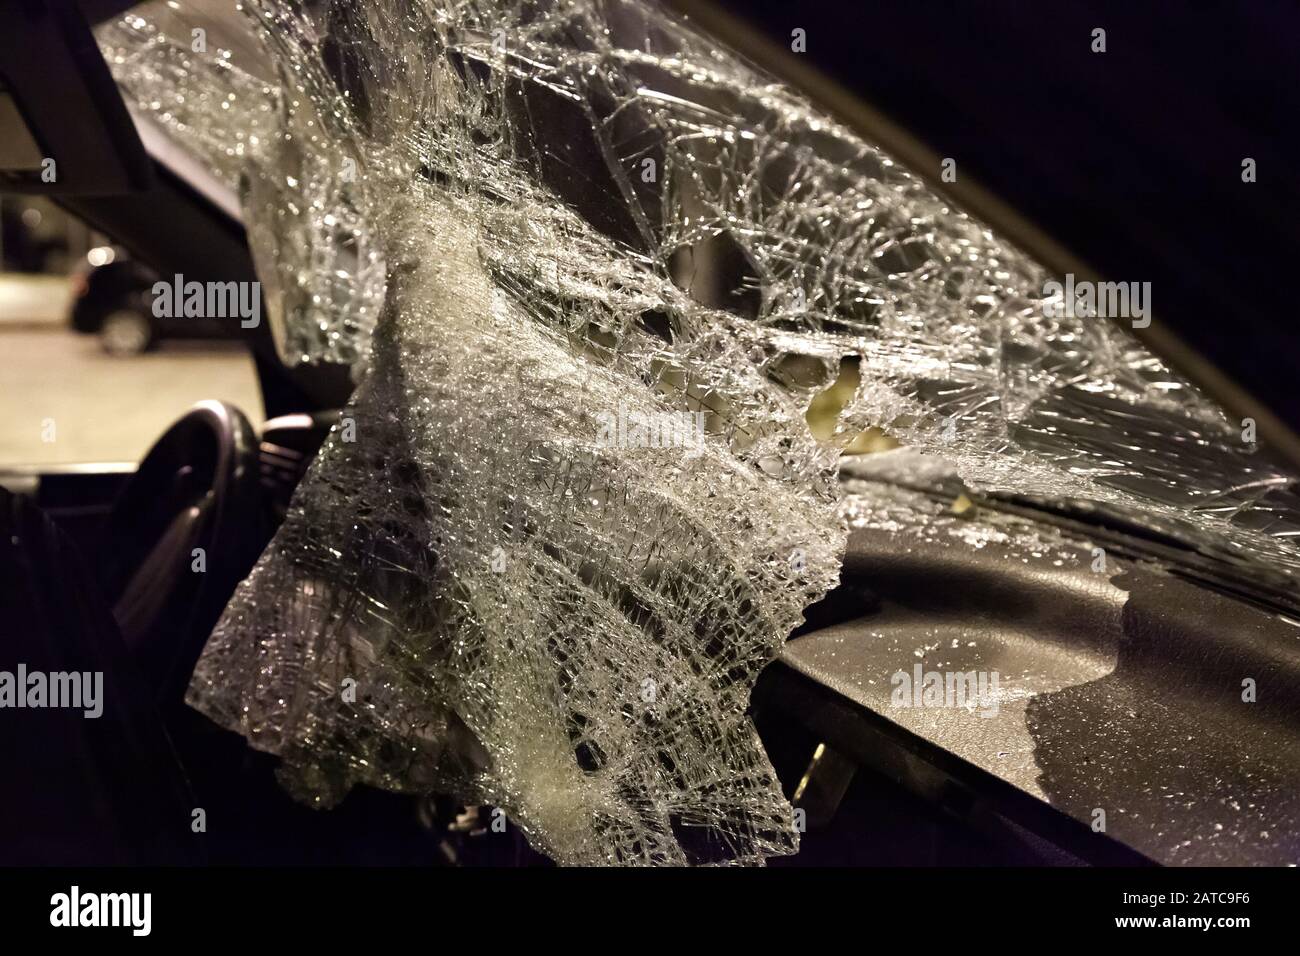 Car accident, shattered vehicle, sinister traffic, road safety Stock Photo